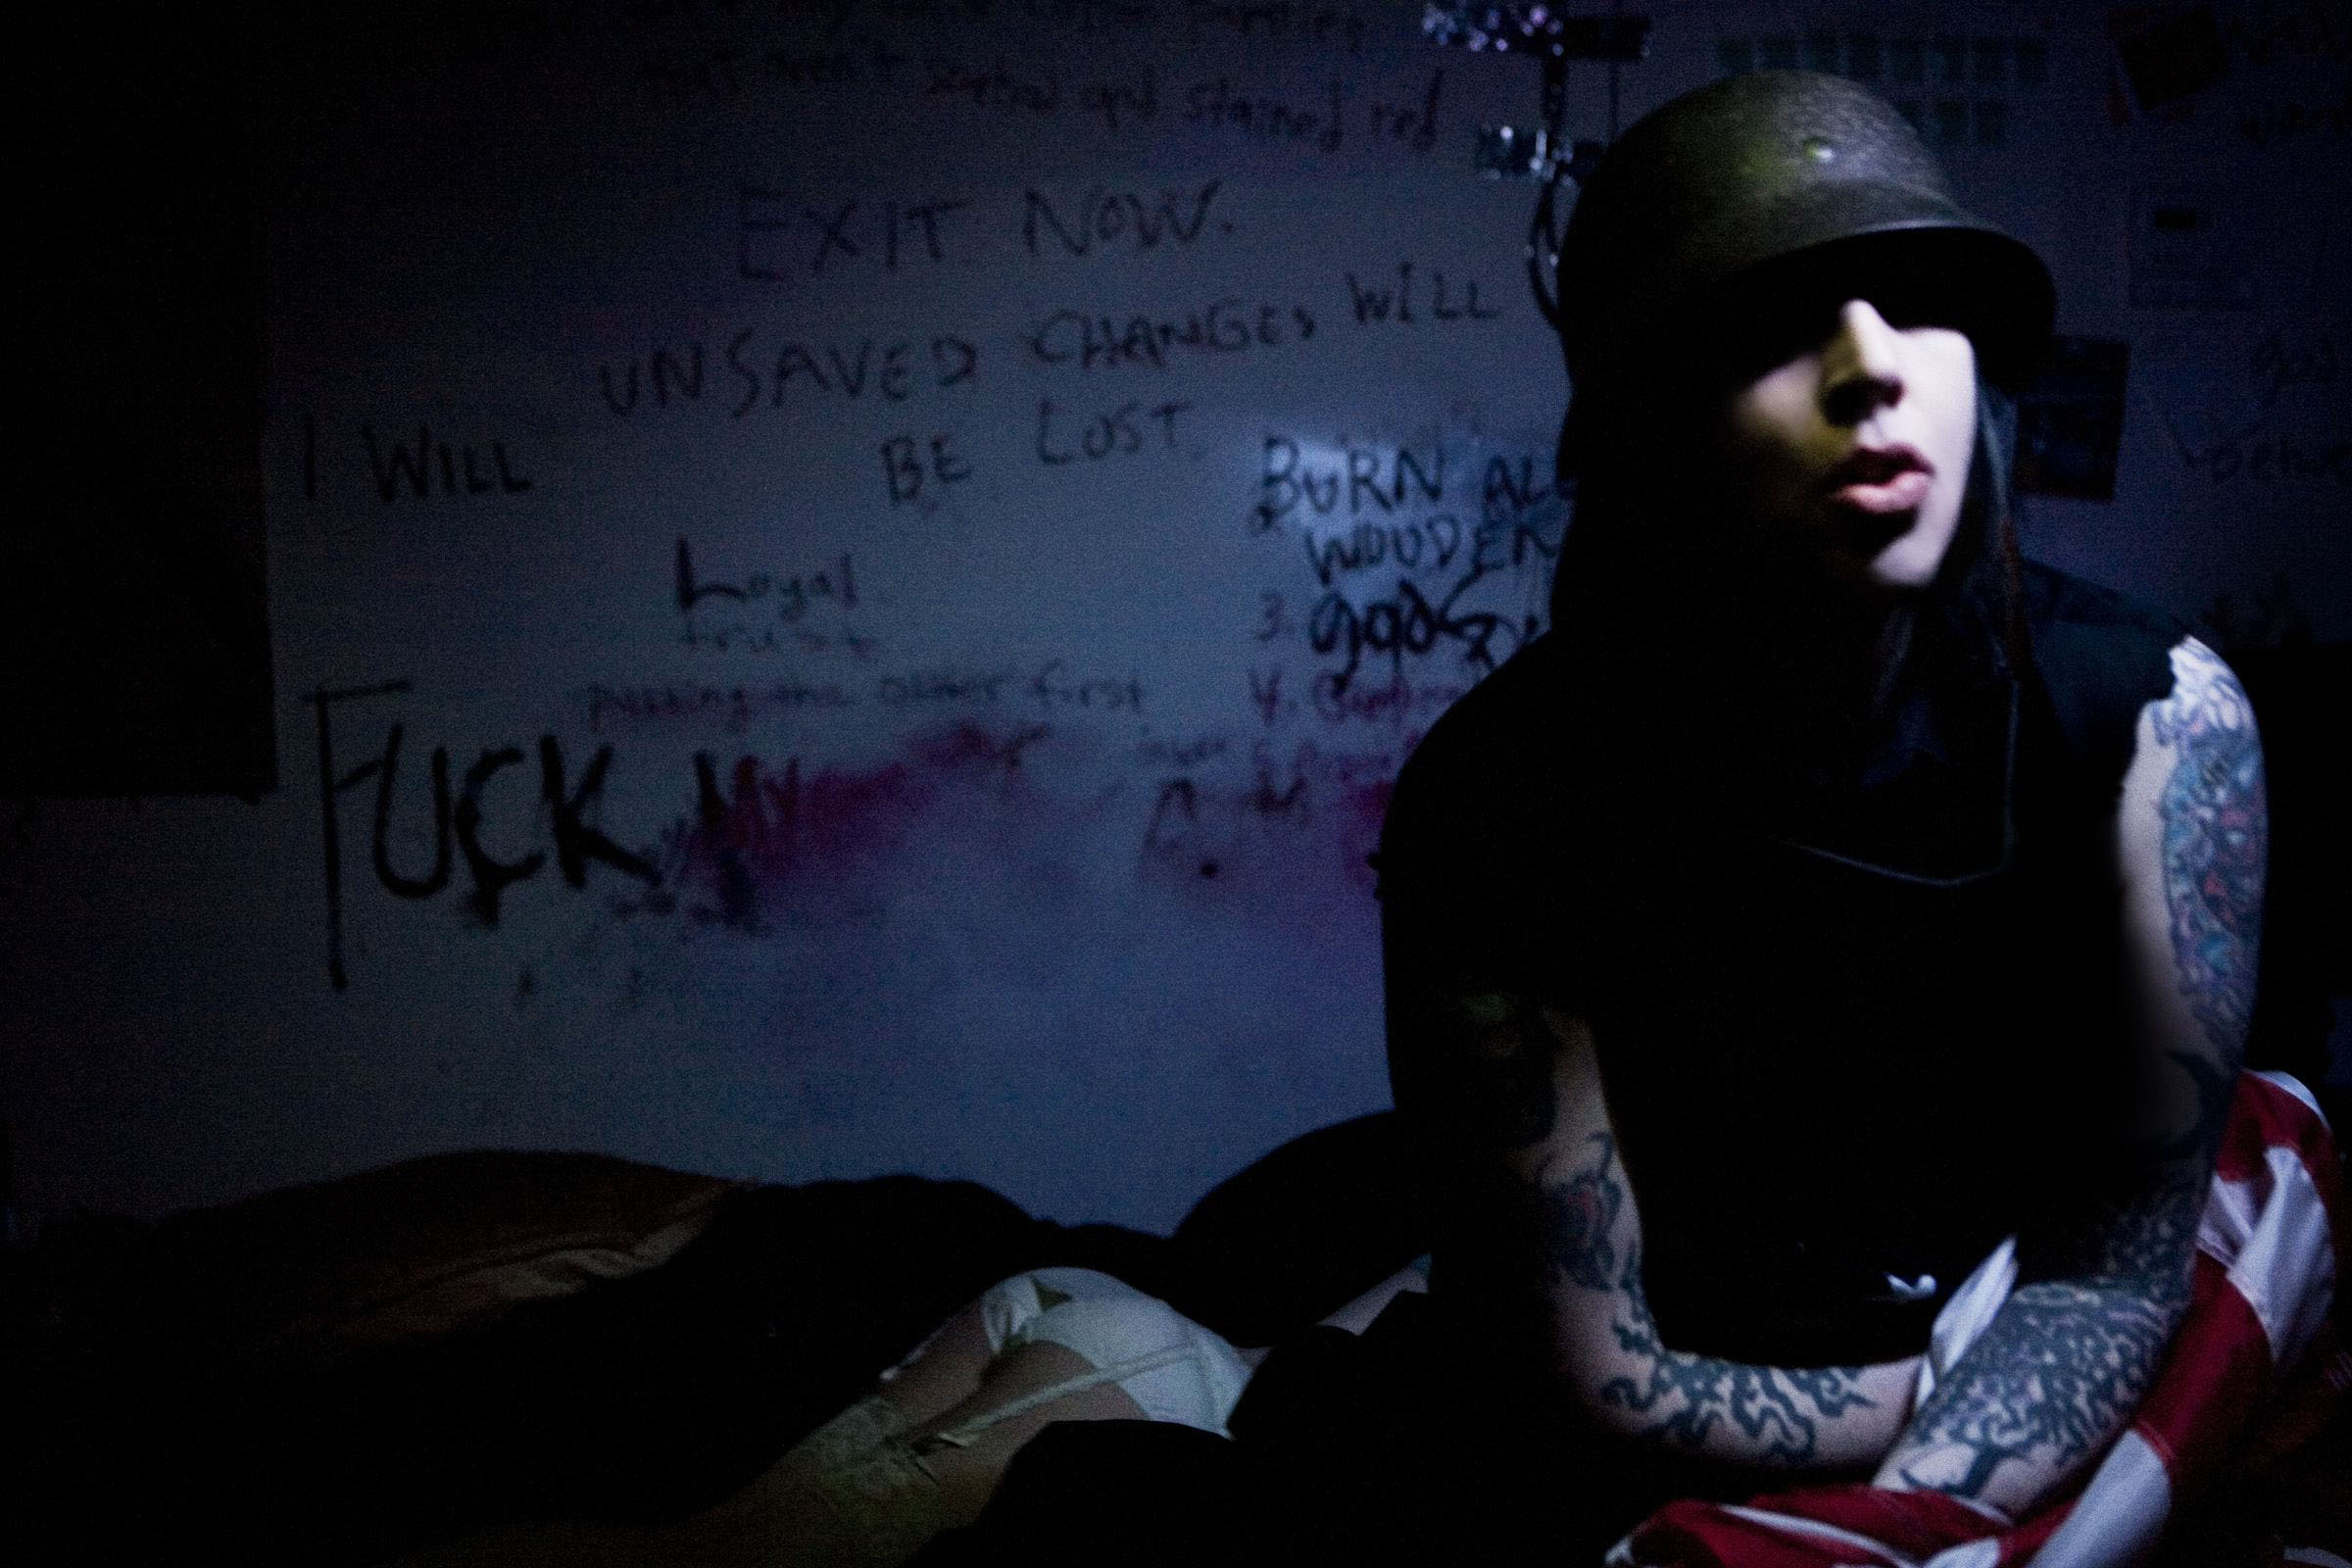 Marilyn Manson High end Of Low wallpaper 2400x1600 119187